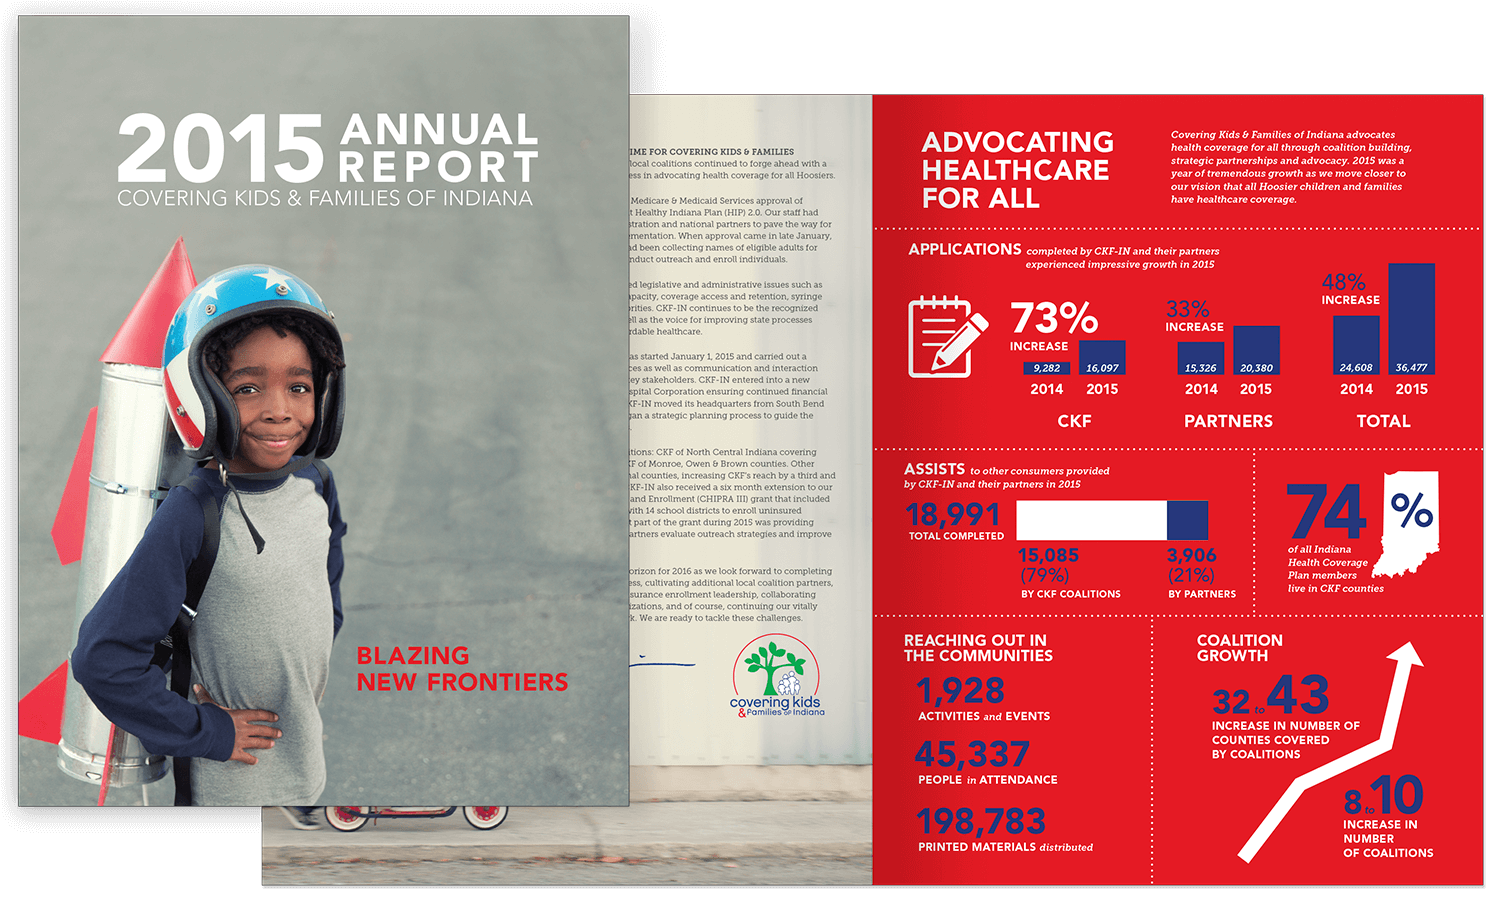 Covering Kids & Families <strong>Annual Report</strong>